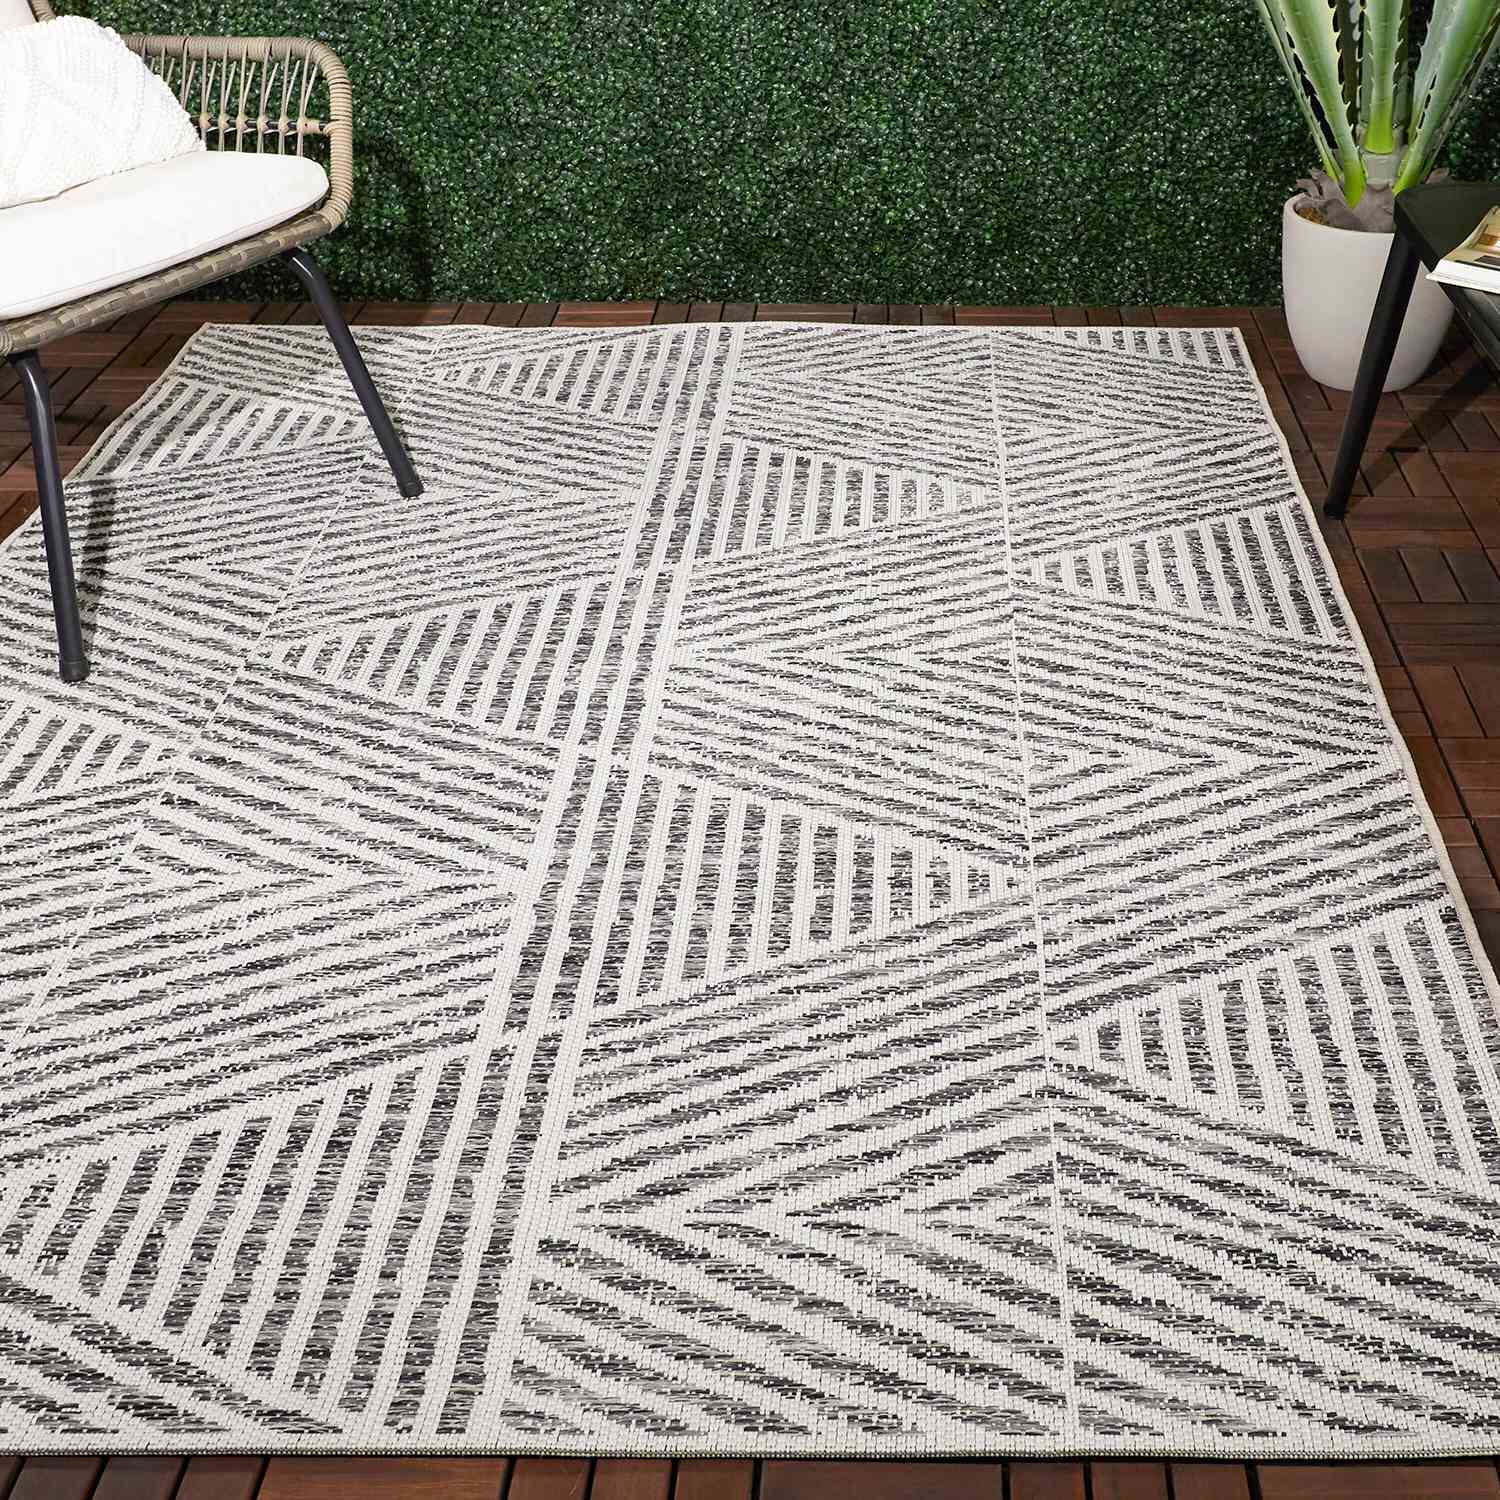 The 11 Best Outdoor Rugs, According to Reviews | Better Homes & Gardens